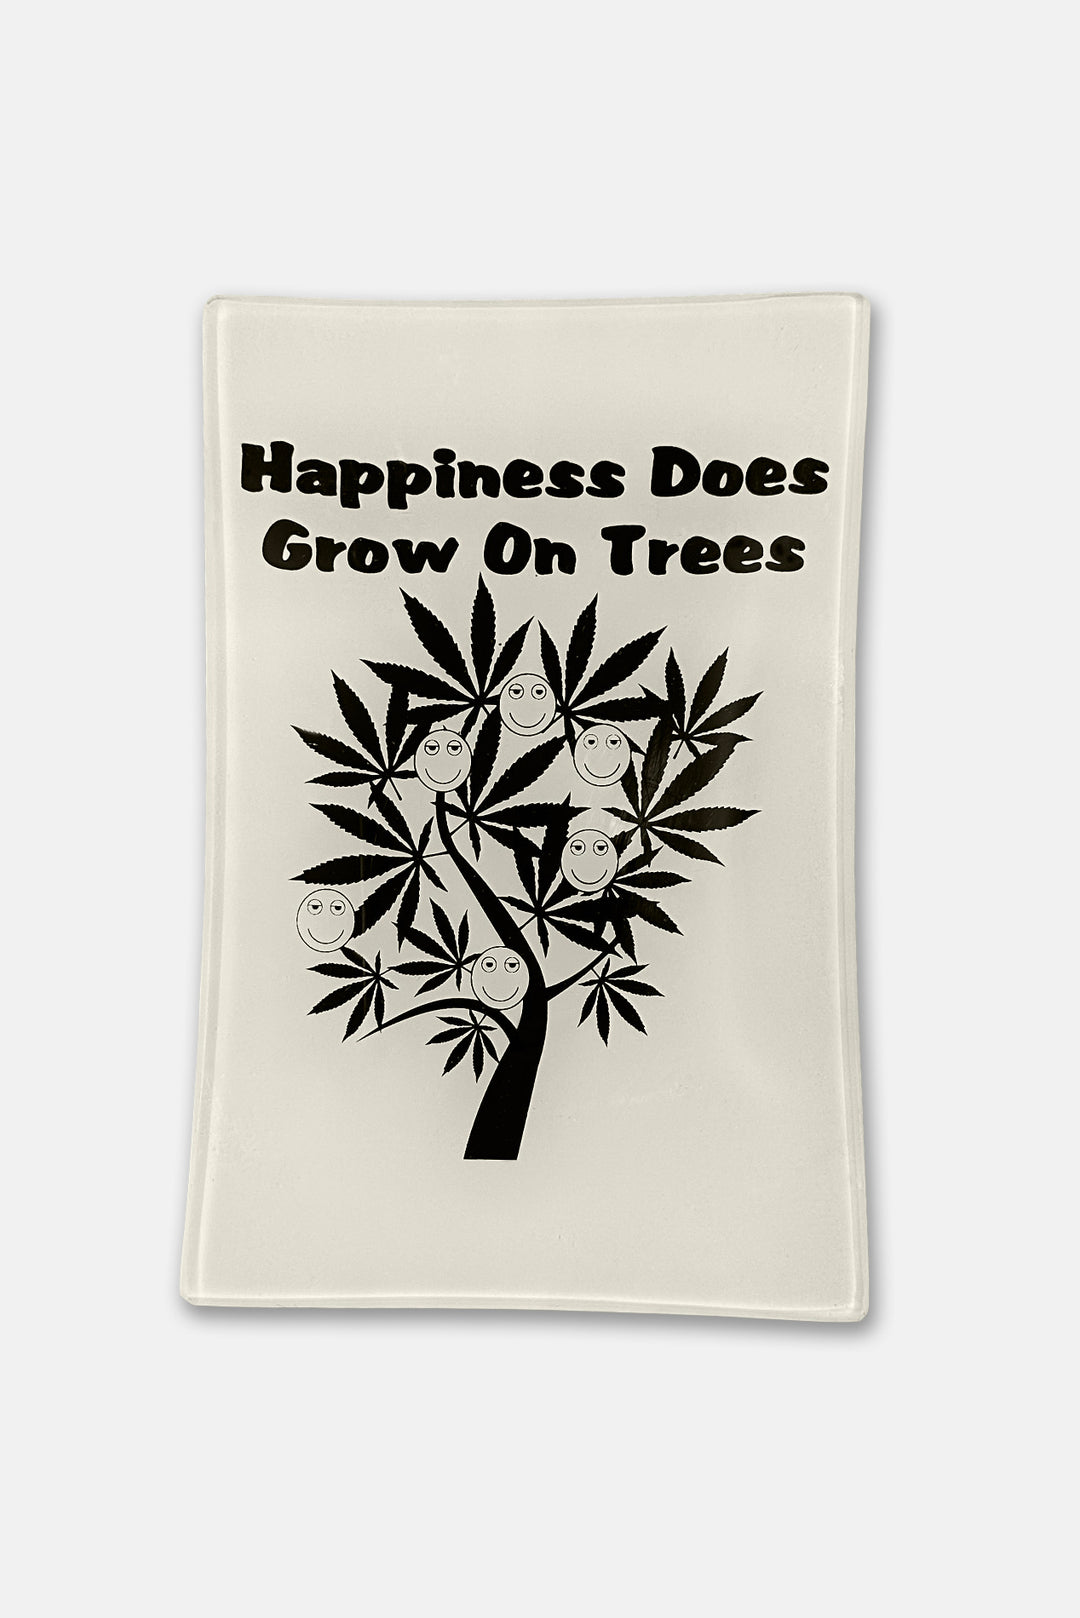 "Happiness Does Grow on Trees" Tray